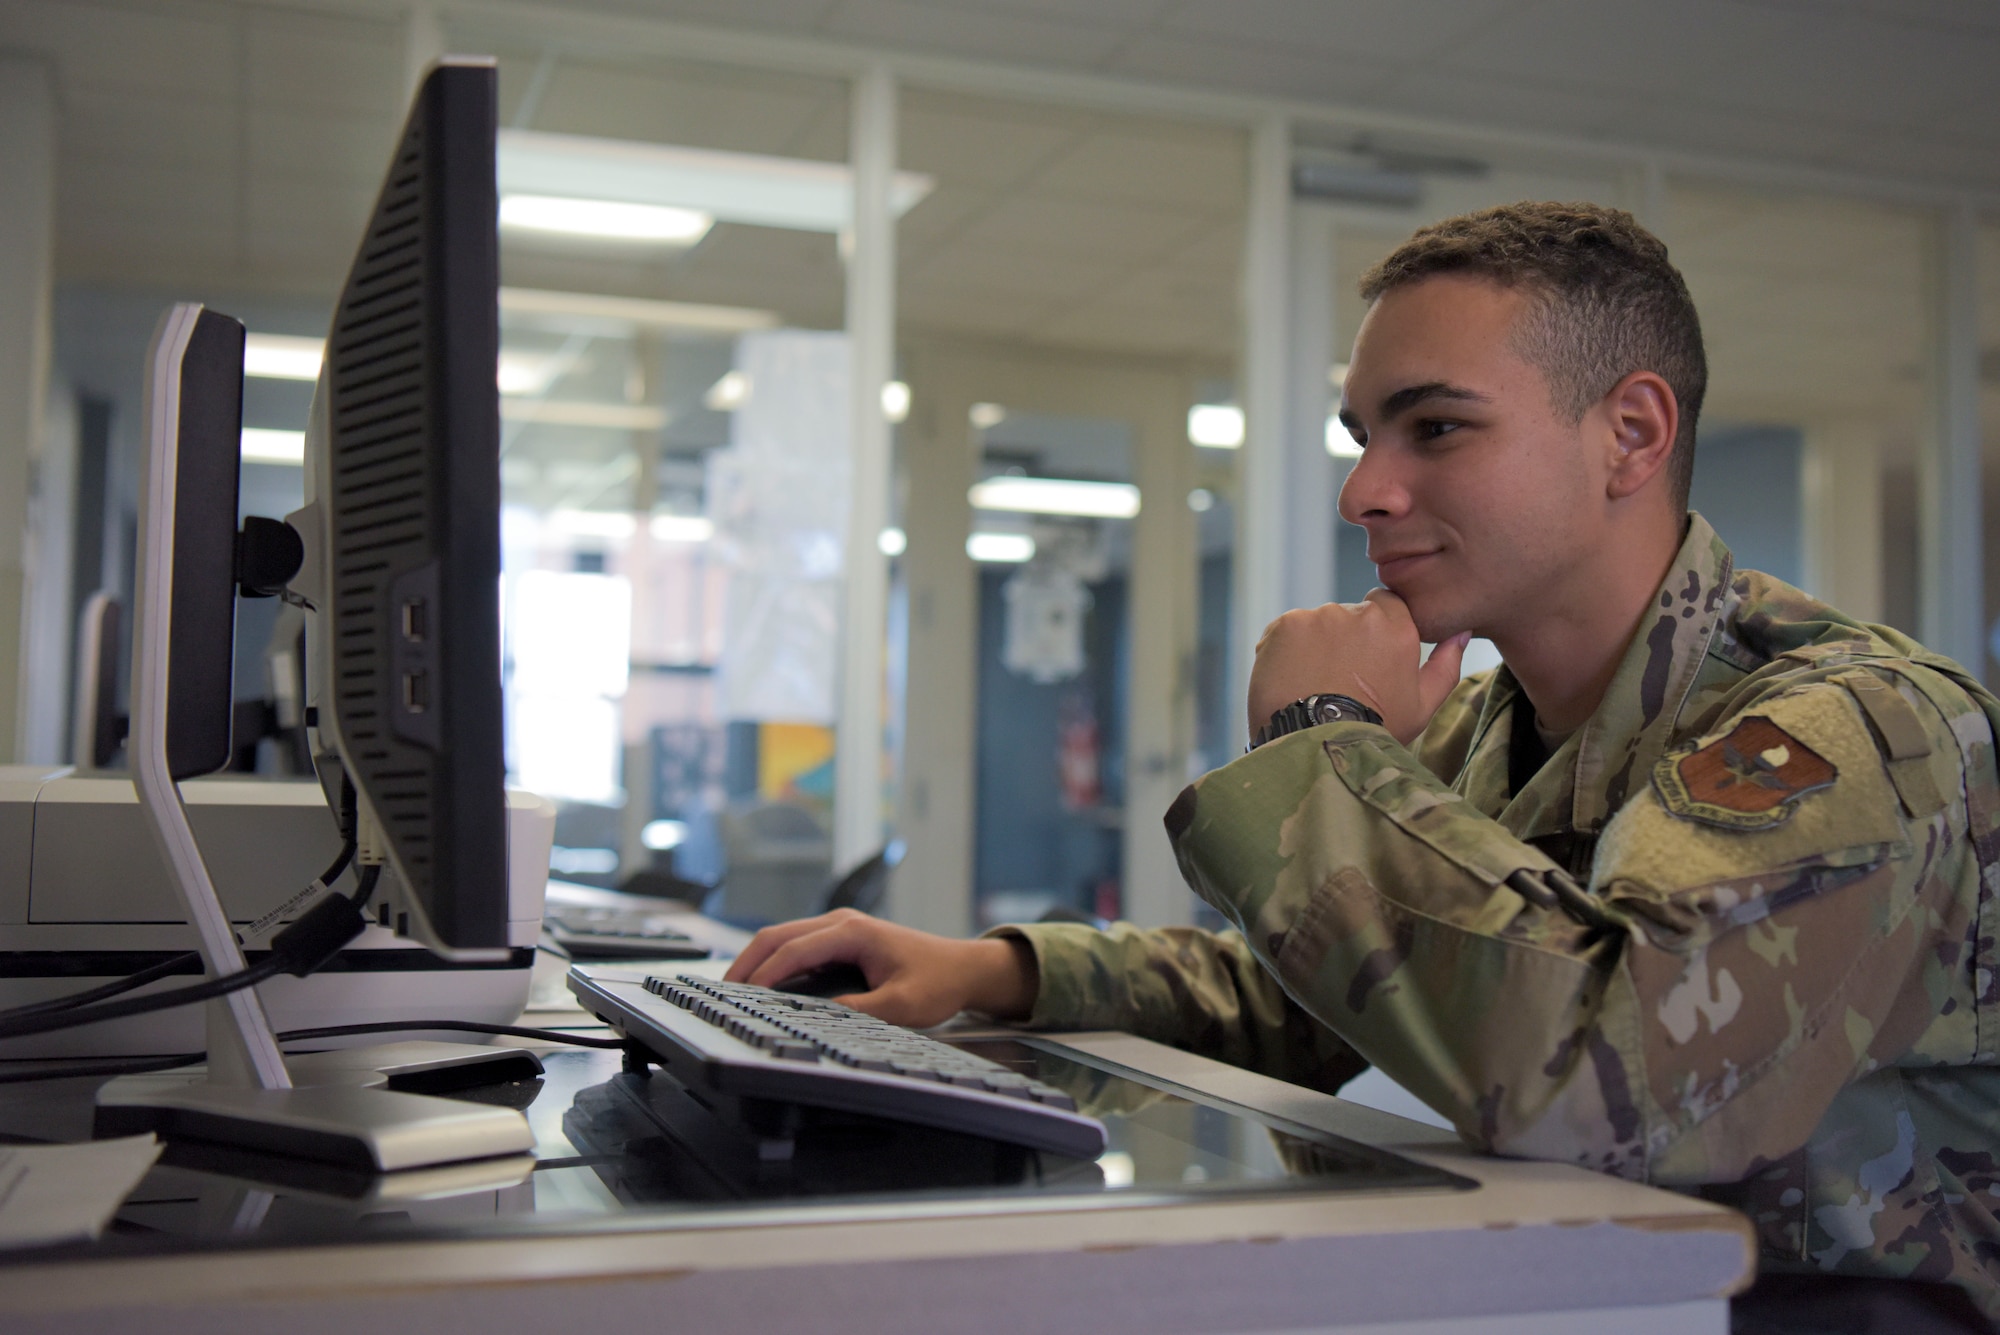 U.S. Air Force Airman 1st Class Branden Valle, 315th Training Squadron student, studies at a computer, Goodfellow Air Force Base, Texas, October 11th, 2022. Valle is training to become an operations intelligence specialist. (U.S. Air Force photo by Senior Airman Michael Bowman)